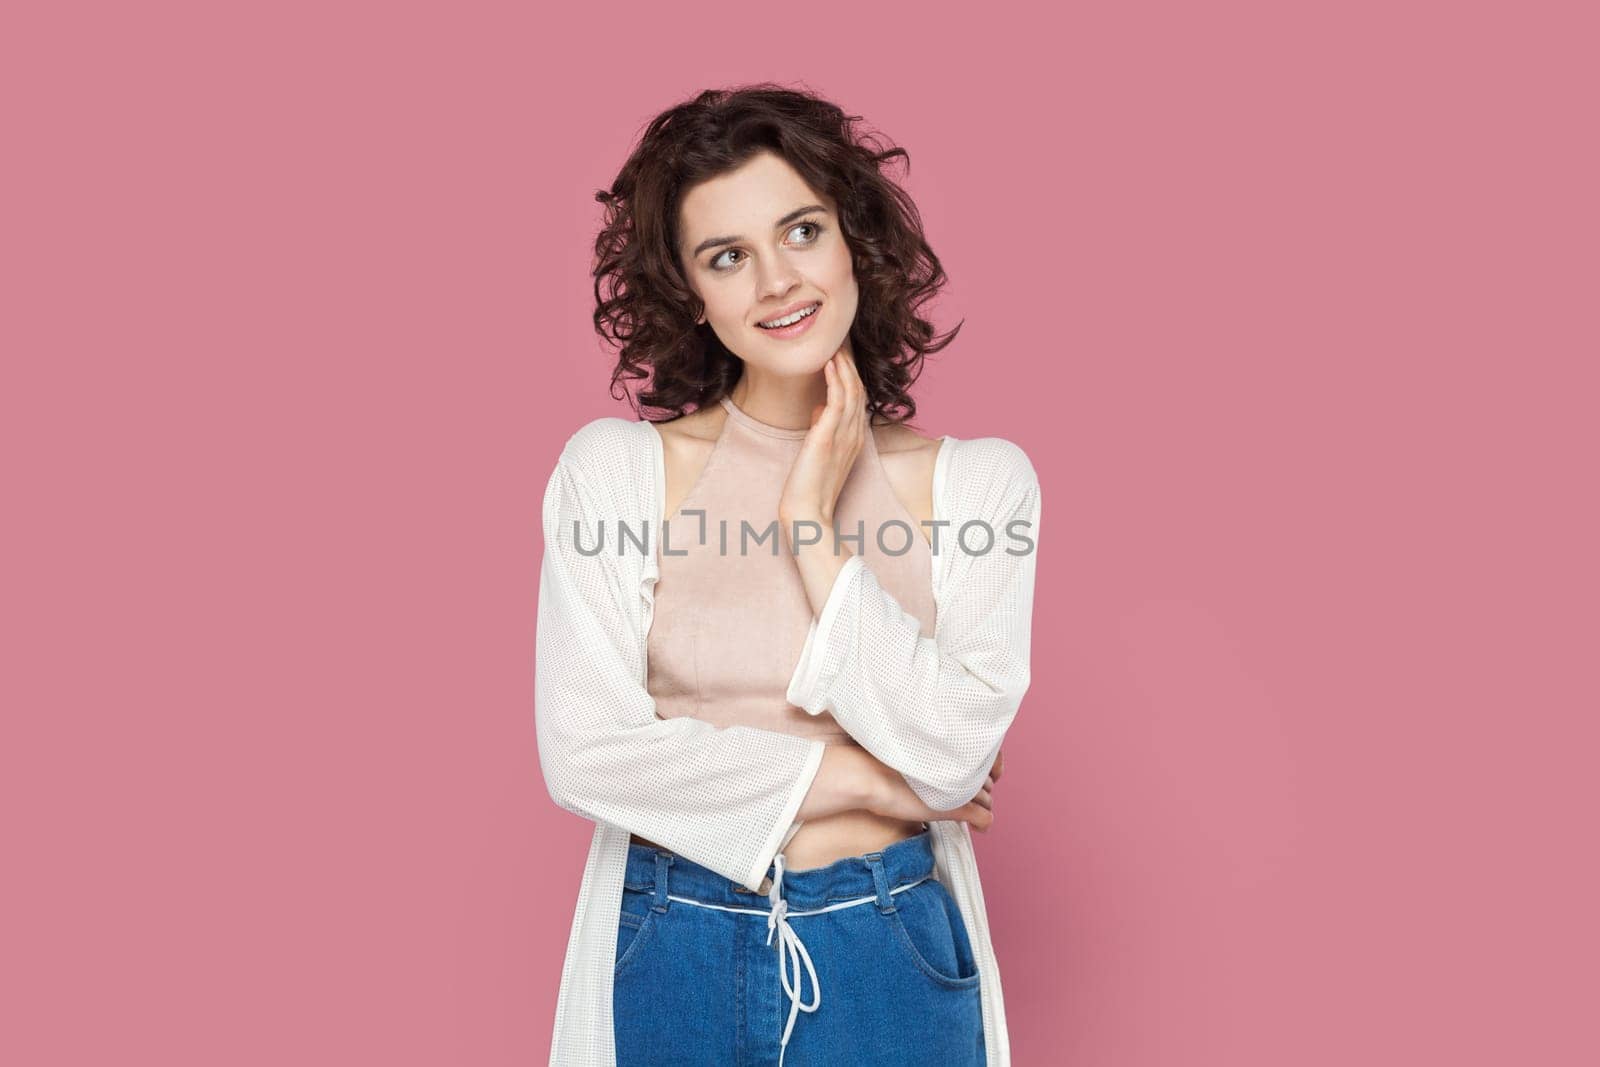 Portrait of friendly pleased smiling woman with curly hair wearing casual style outfit, looking away, dreaming about something pleasant. Indoor studio shot isolated on pink background.